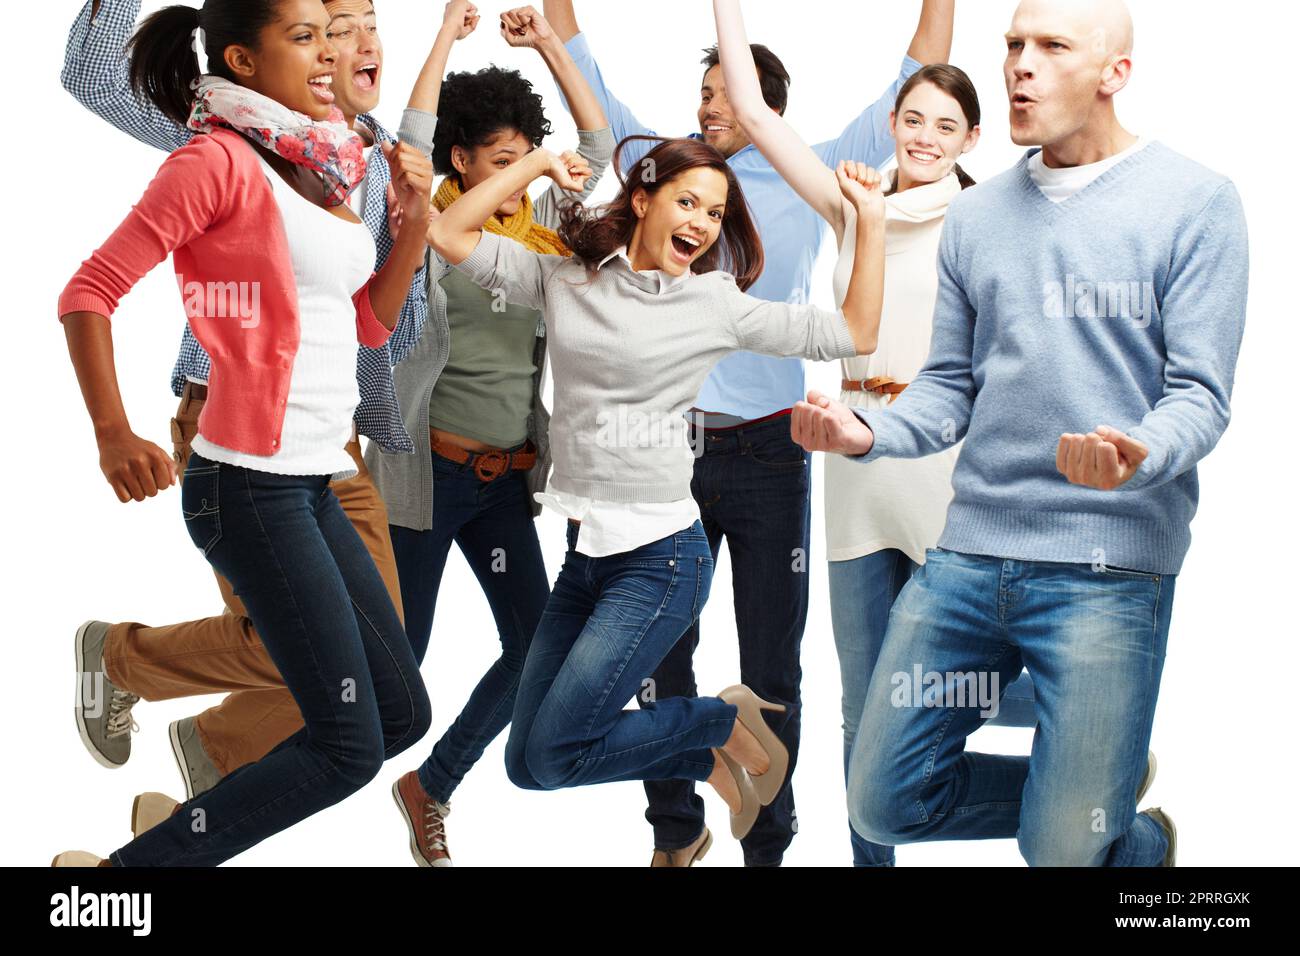 Jumping for joy. Studio shot of a diverse group of vibrant young people jumping into the air isolated on white. Stock Photo